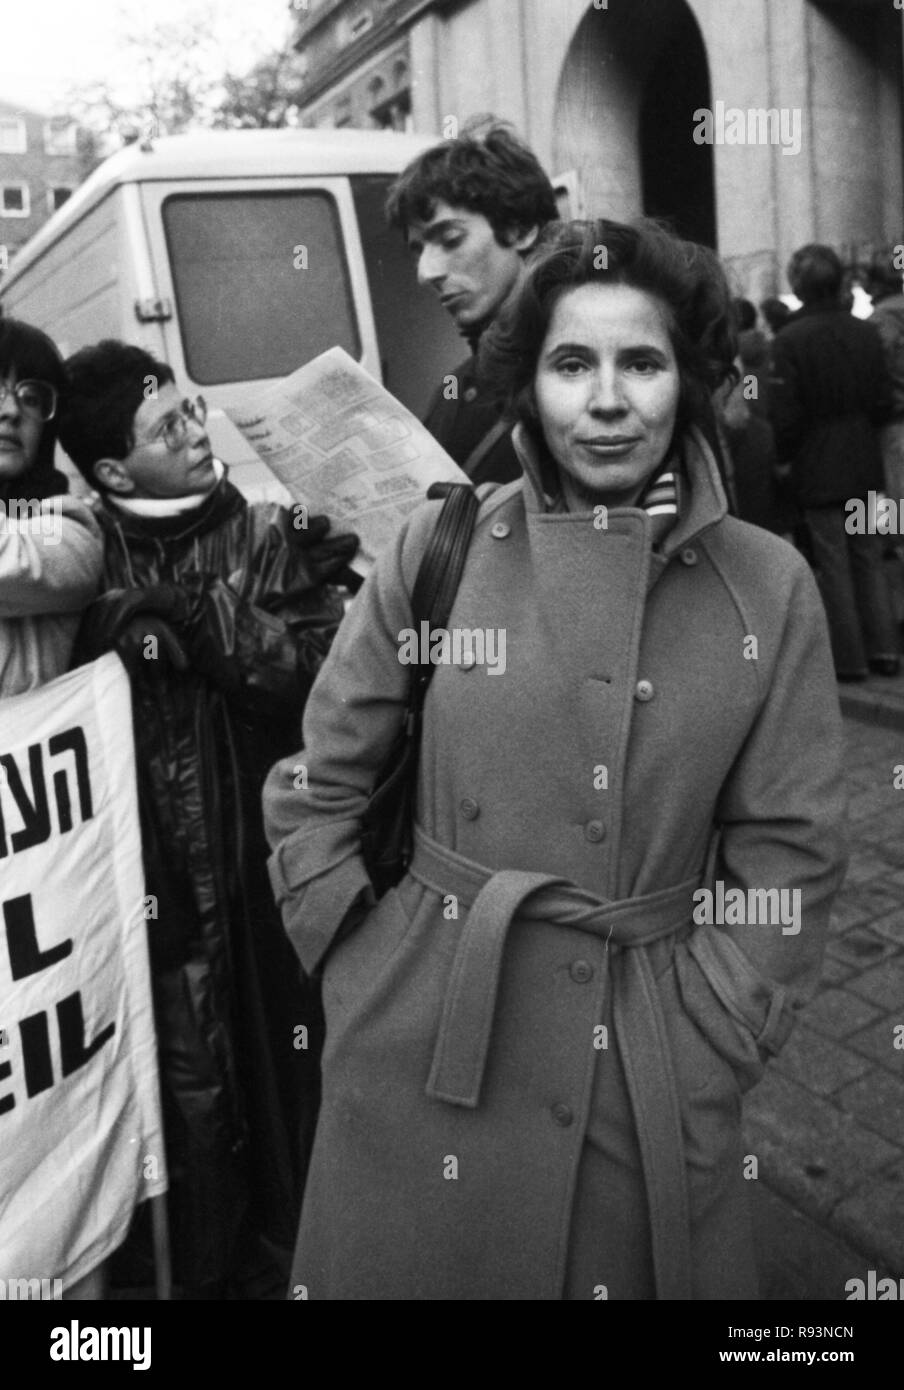 French Jews and German Nazi victims demonstrate for a conviction of the accused Kurt Lischka, the former Gestapo chief of Paris, during the trial on October 23, 1979 at the regional court in Cologne. Beate Klarsfeld. | usage worldwide Stock Photo